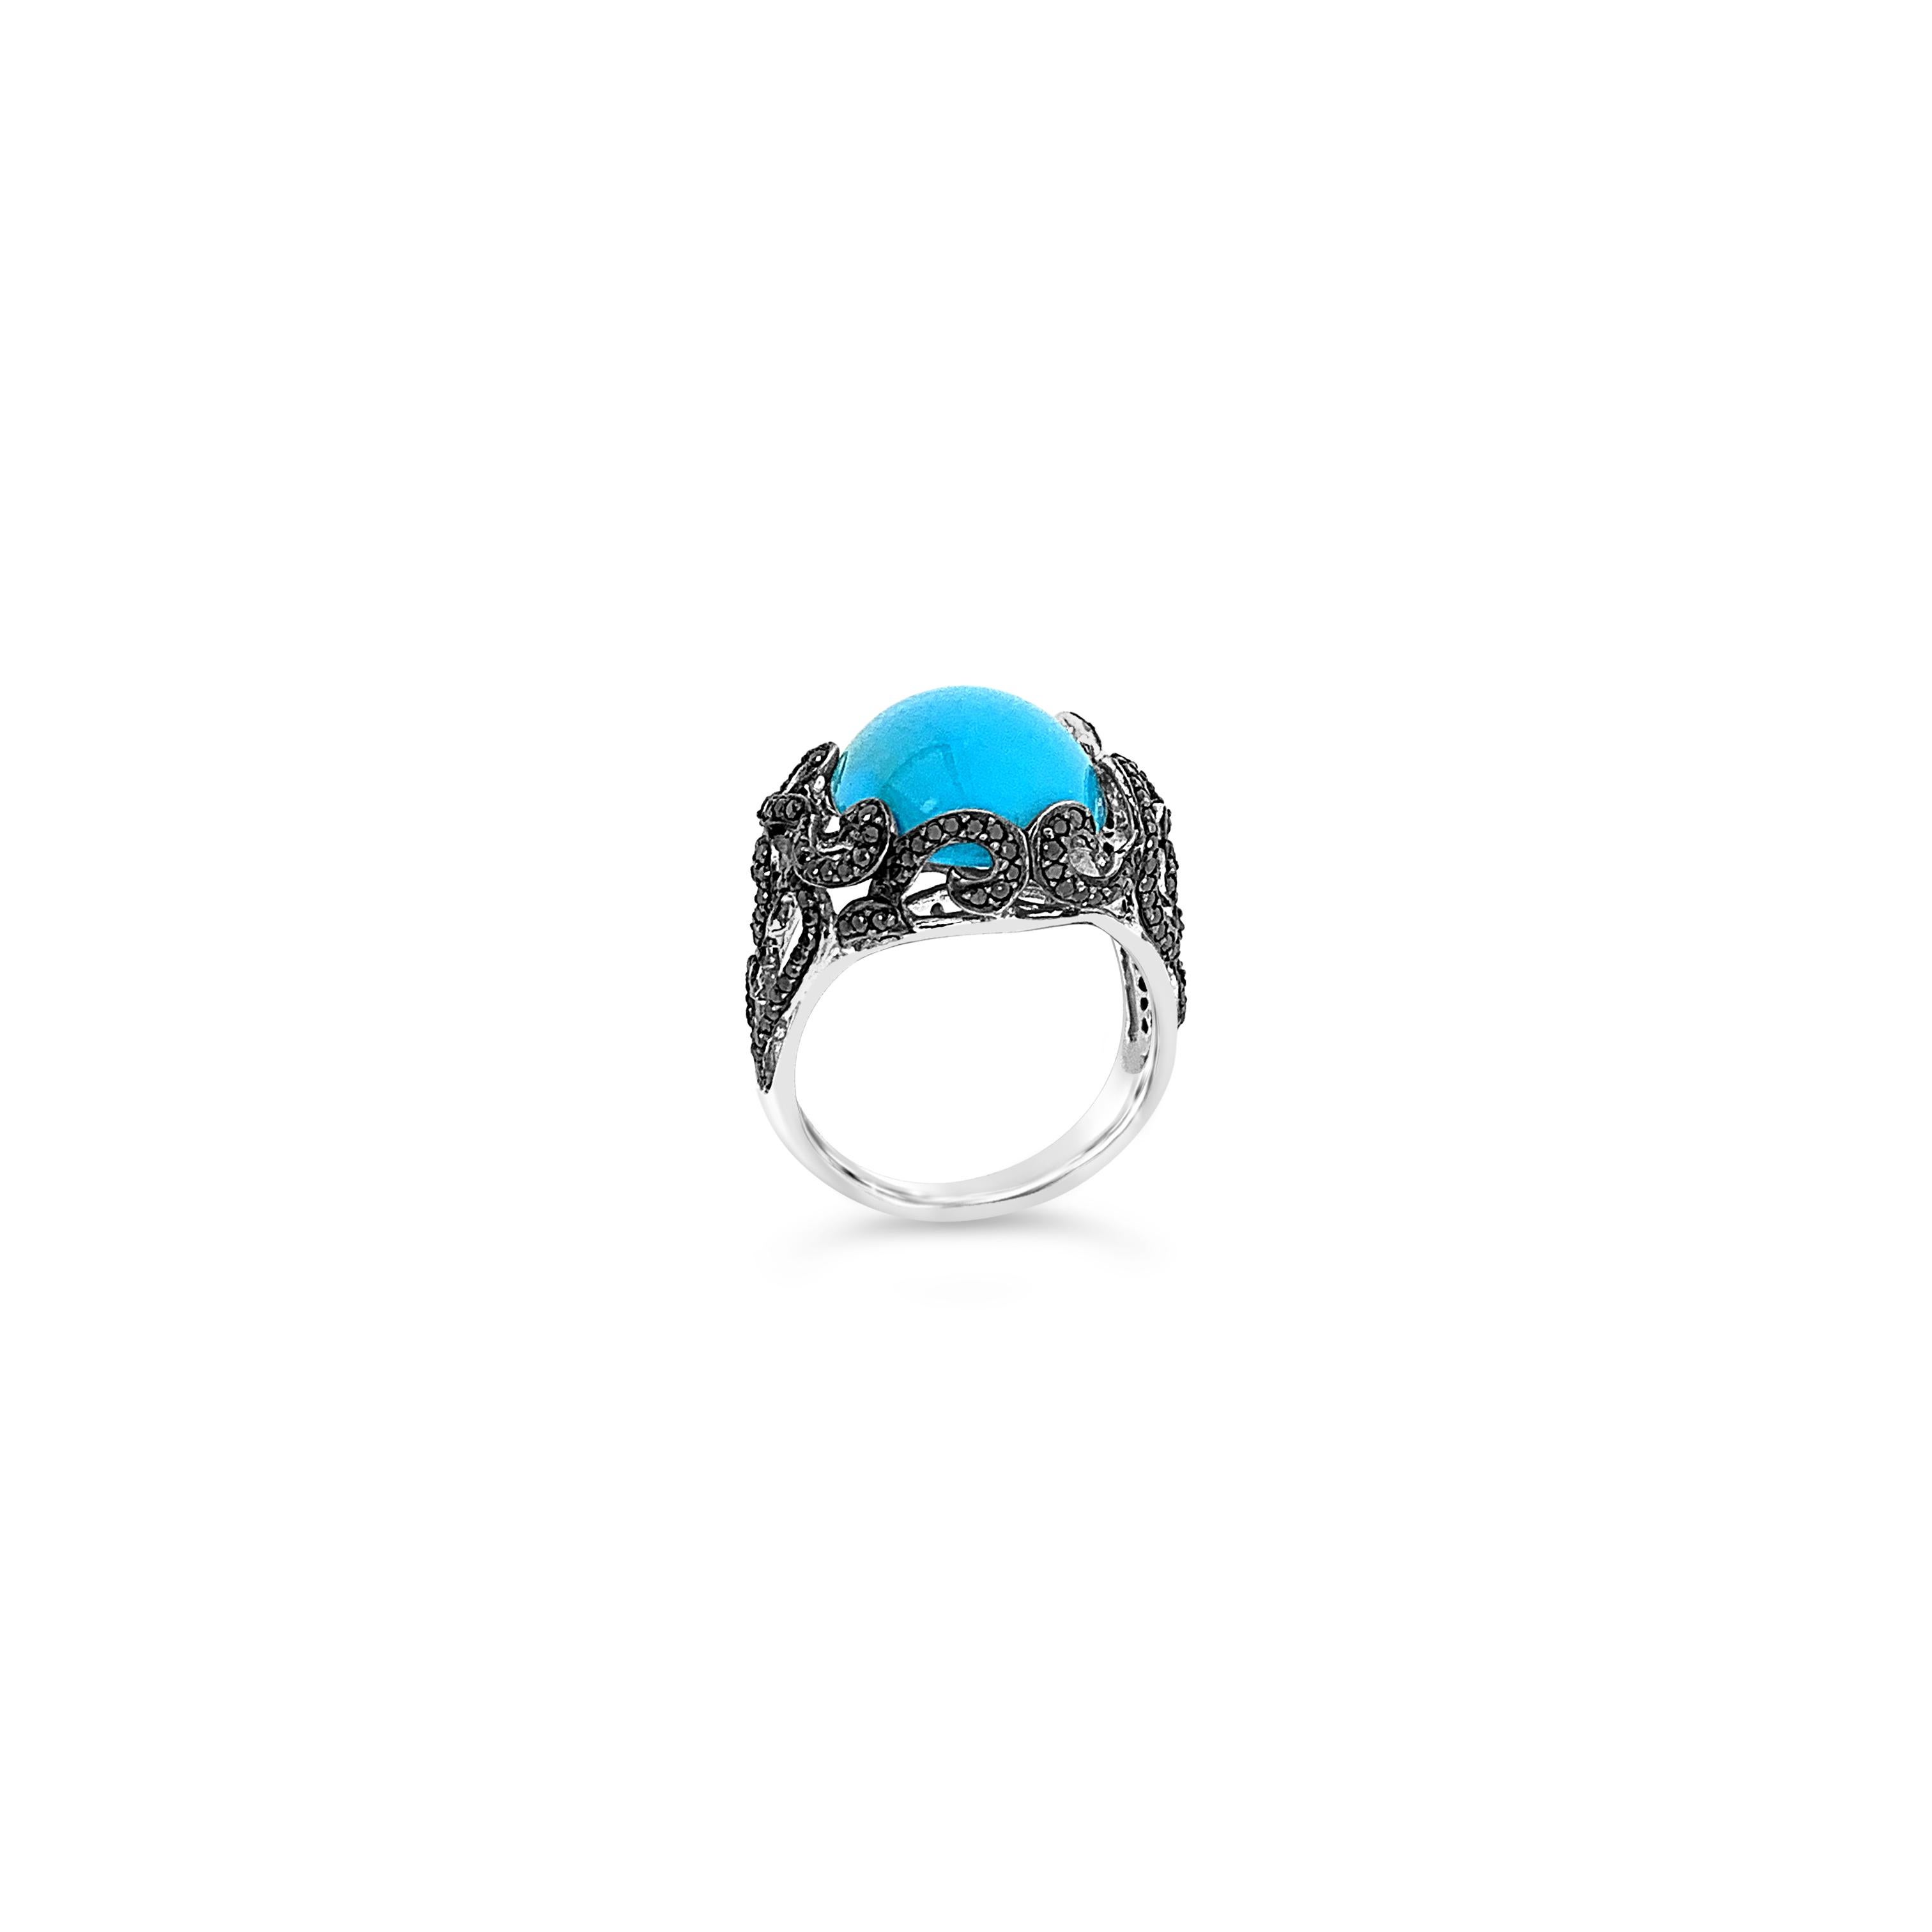 Le Vian® Ring featuring 6 1/3 cts. Robins Egg Blue Turquoise™, 7/8 cts. Black Diamonds set in 14K Vanilla Gold®

Diamonds Breakdown:
7/8 cts Black Diamonds

Gems Breakdown:
6 1/3 cts Turquoise

Please feel free to reach out with any questions!

Item